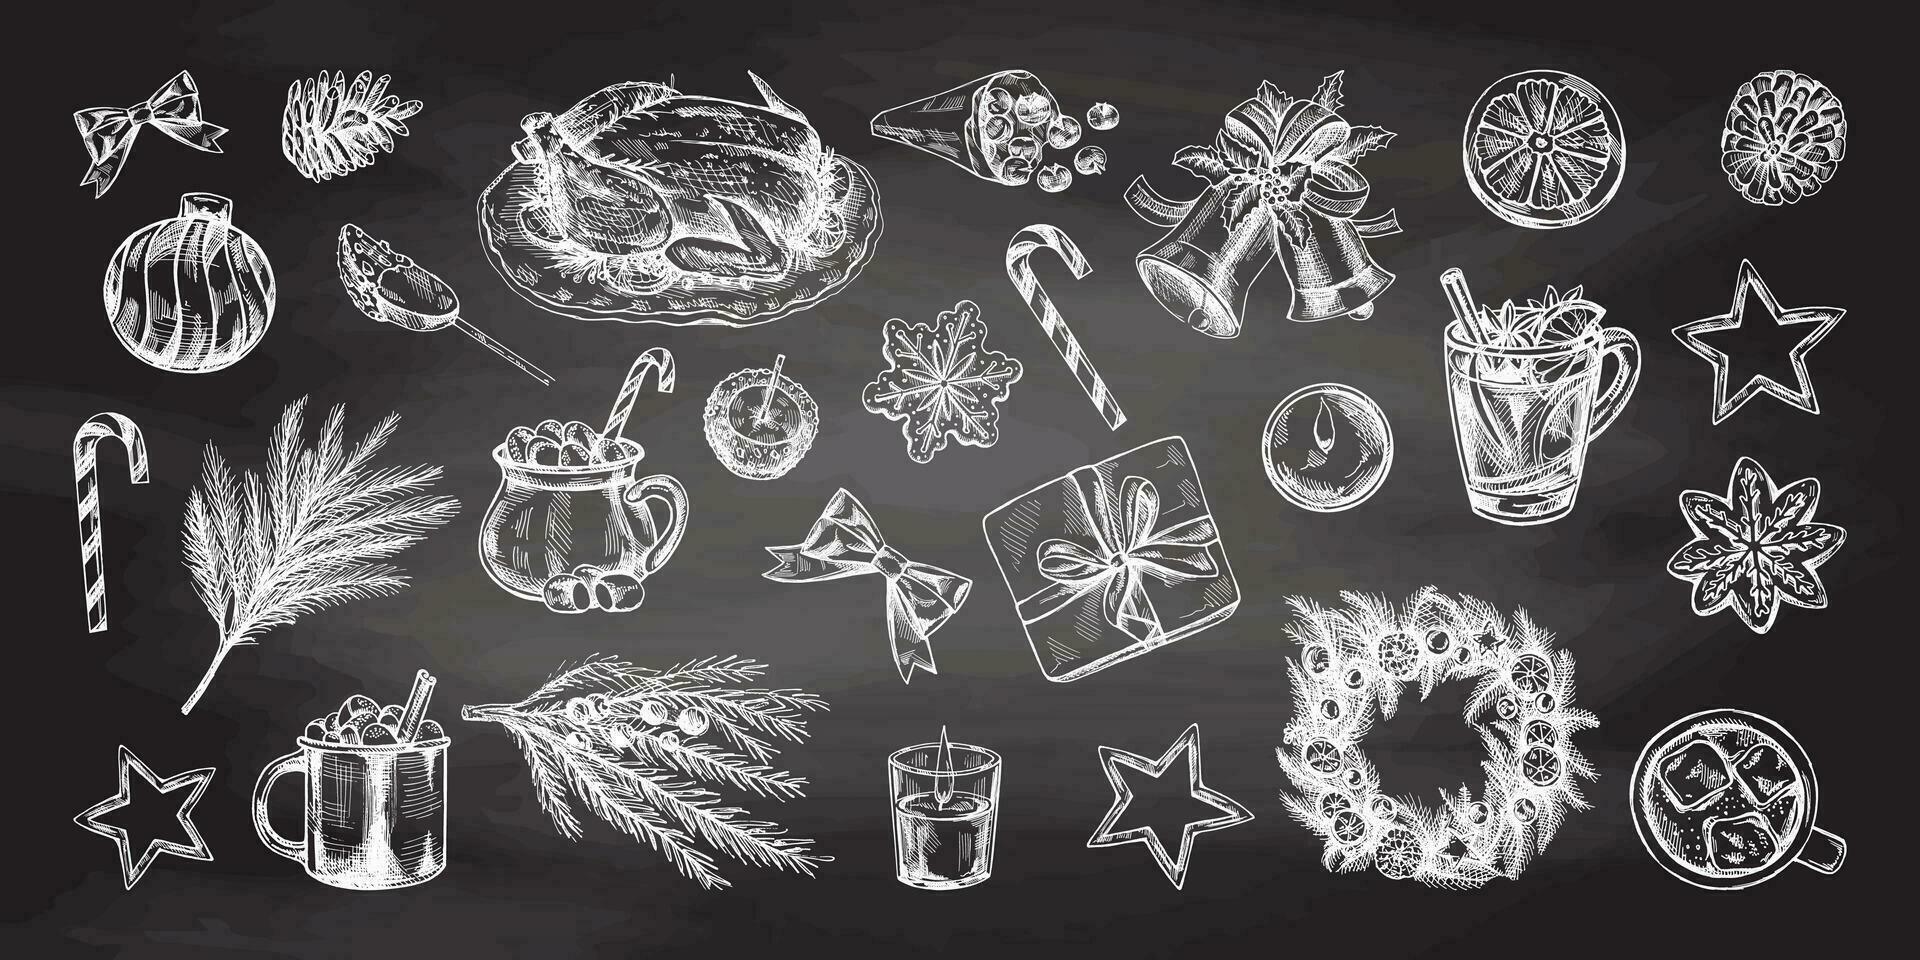 Hand-drawn Christmas set in sketch style isolated on chalkboard background. Festive decoration - wreath, gift, sweets, food, Christmas tree decor, drinks and spices sketches. Ingraved. vector